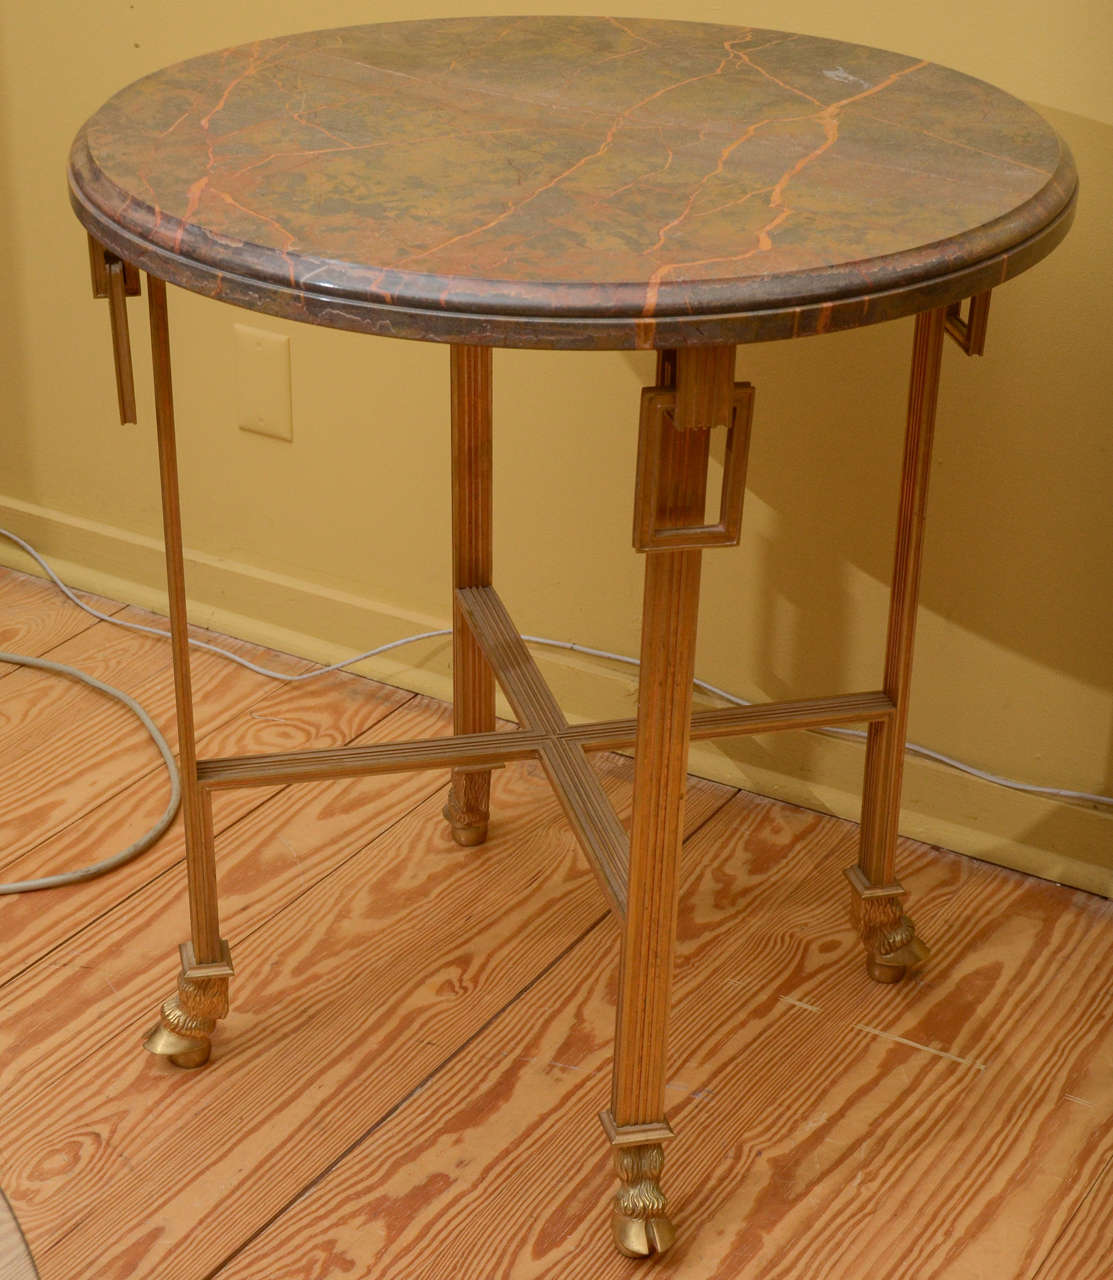 Marble-top table with bronze base in the French deco style. Made in France.